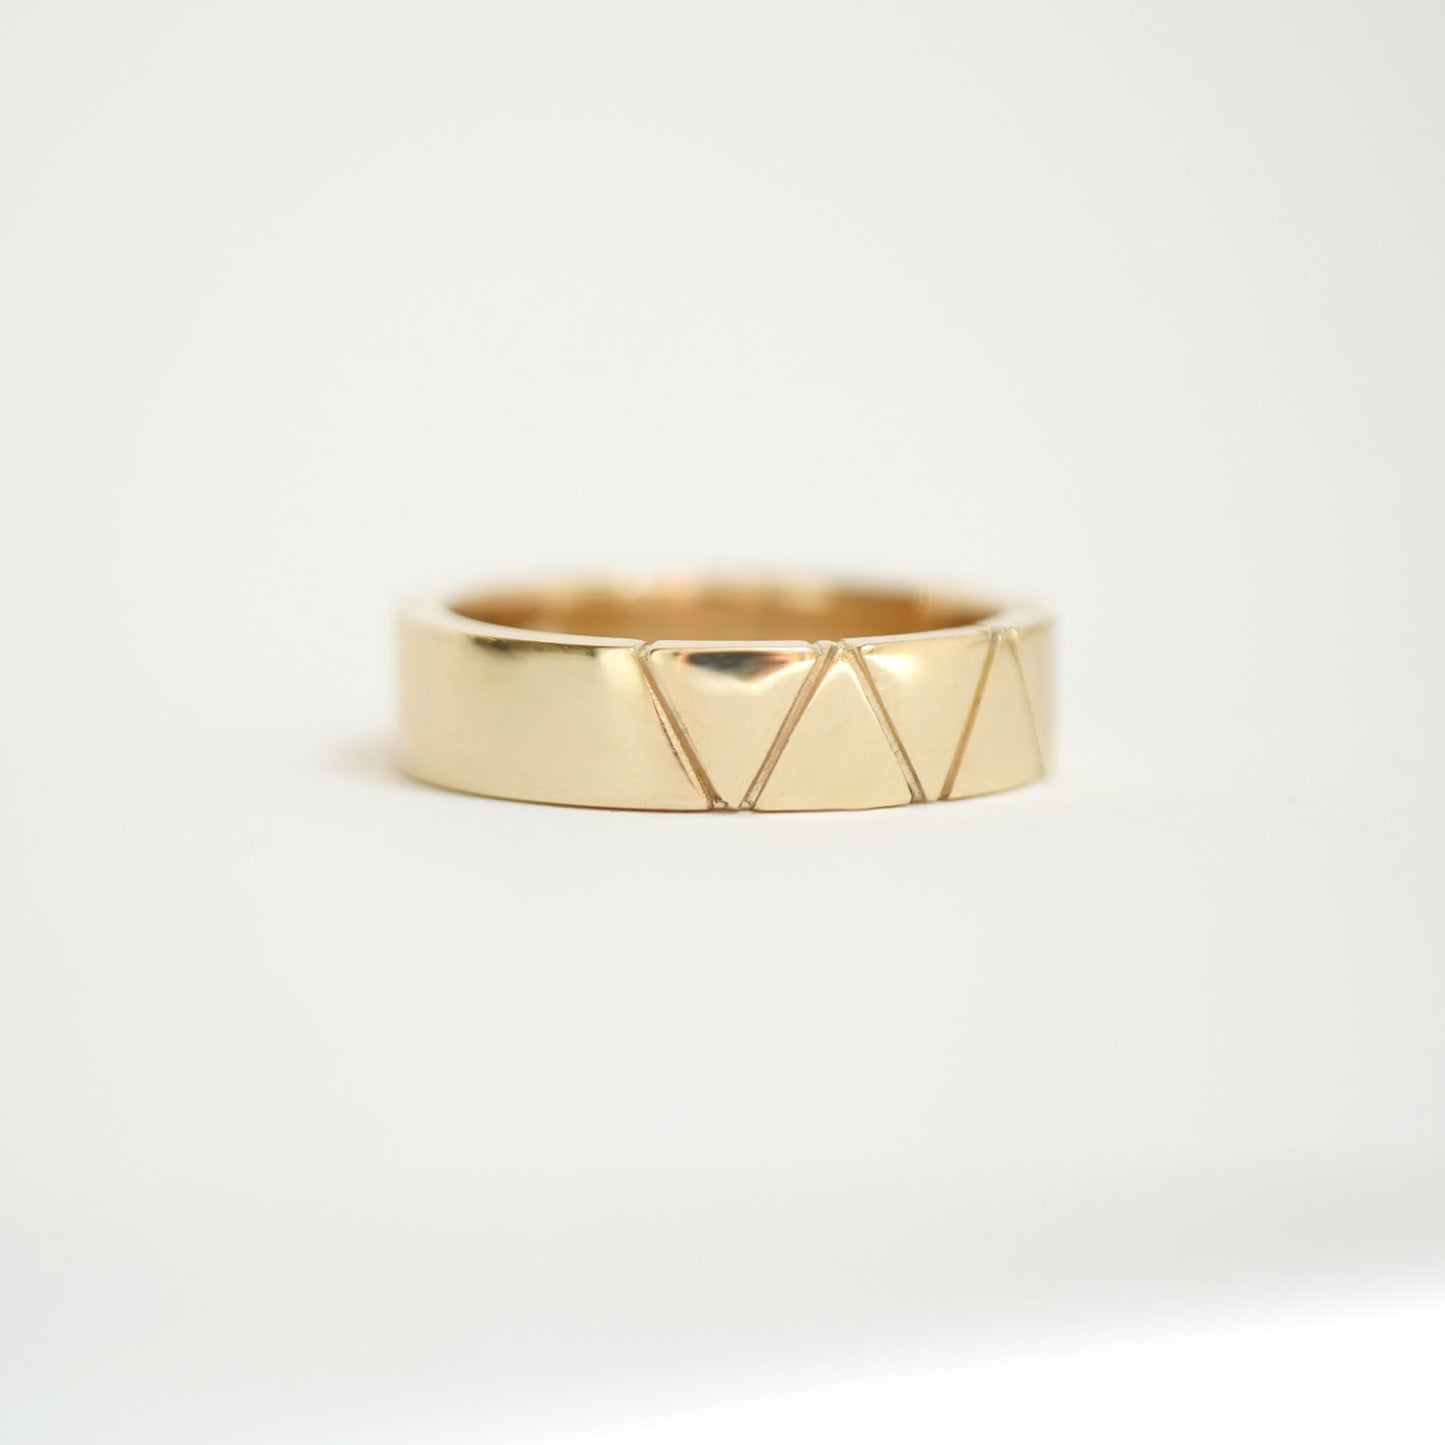 5mm Notched Triangle Ring